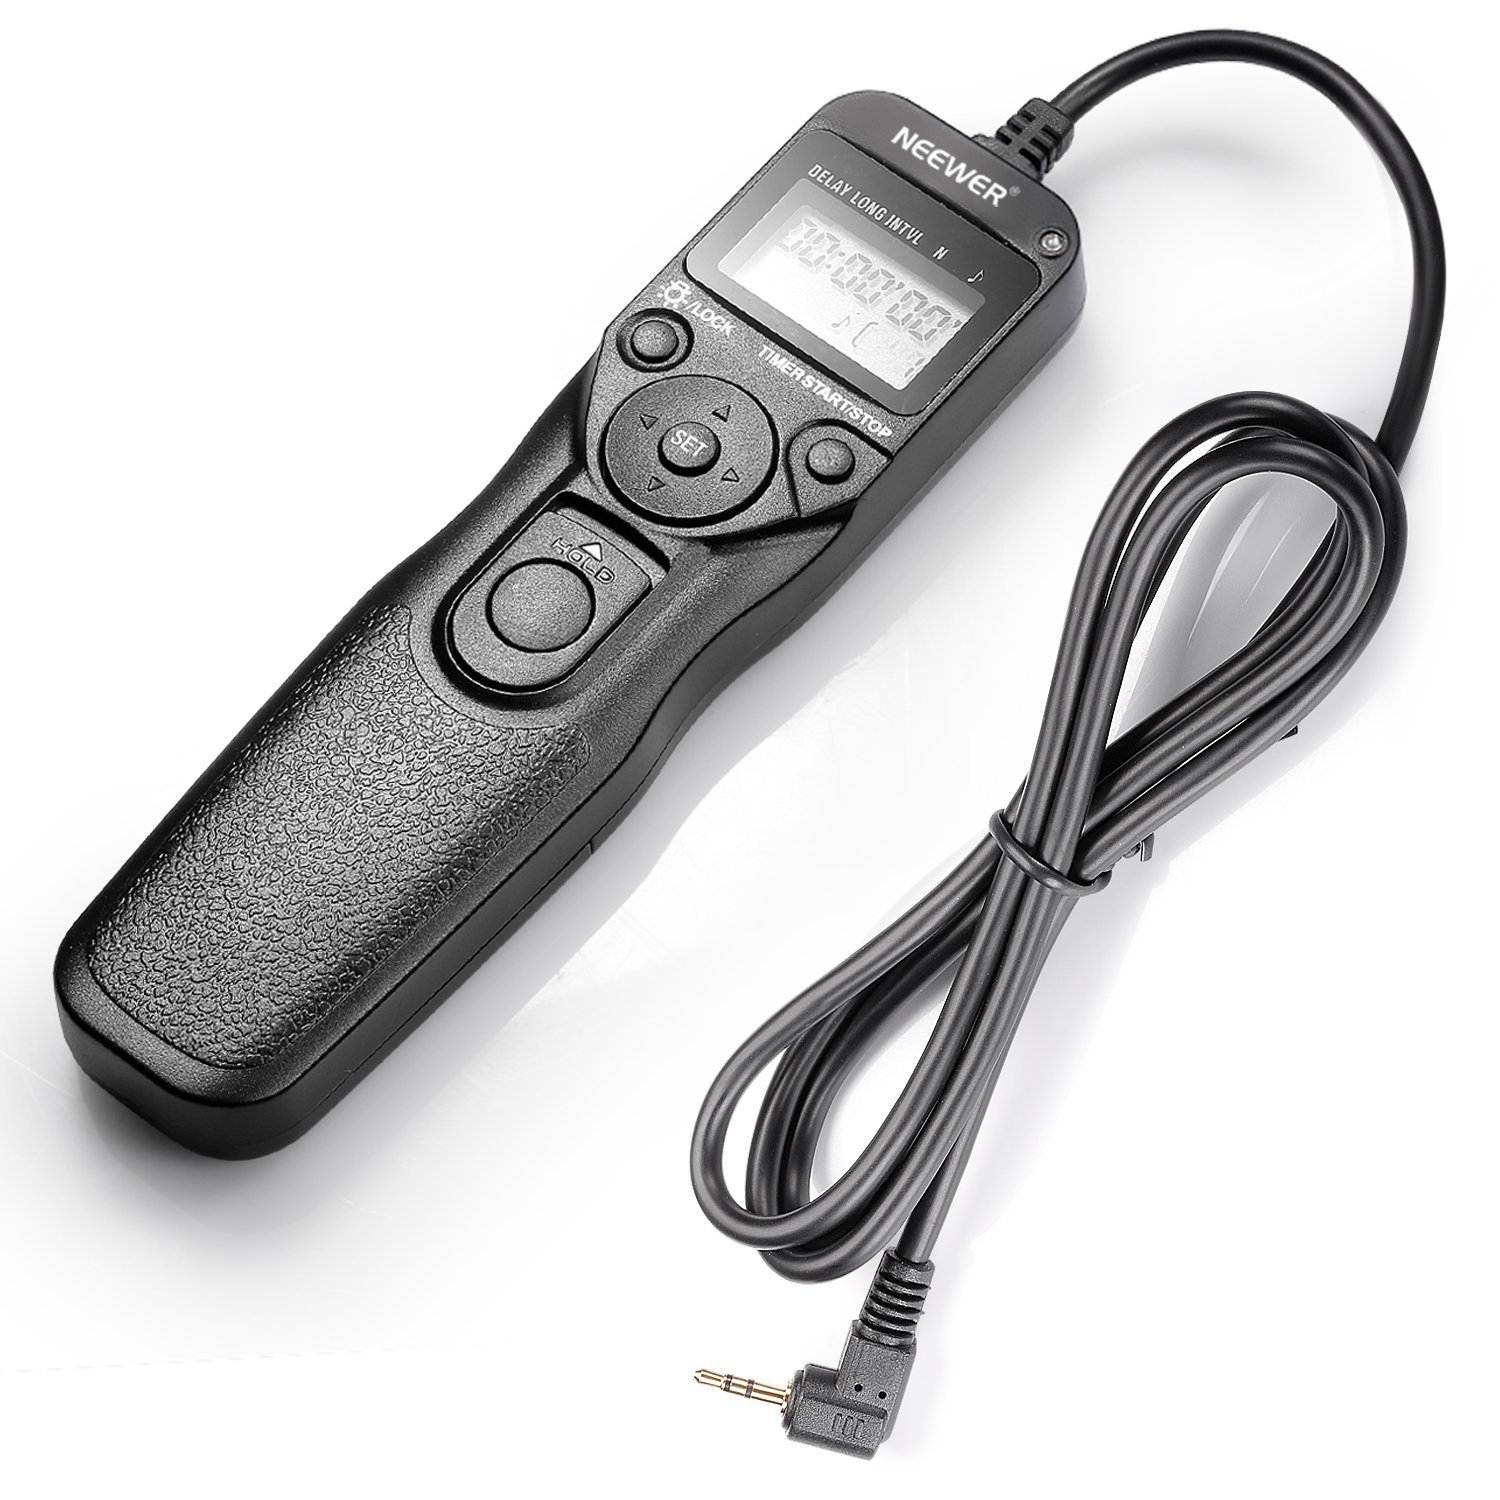 Neewer LCD Timer Shutter Release Remote Control for Canon 700D T5i 650D i i 